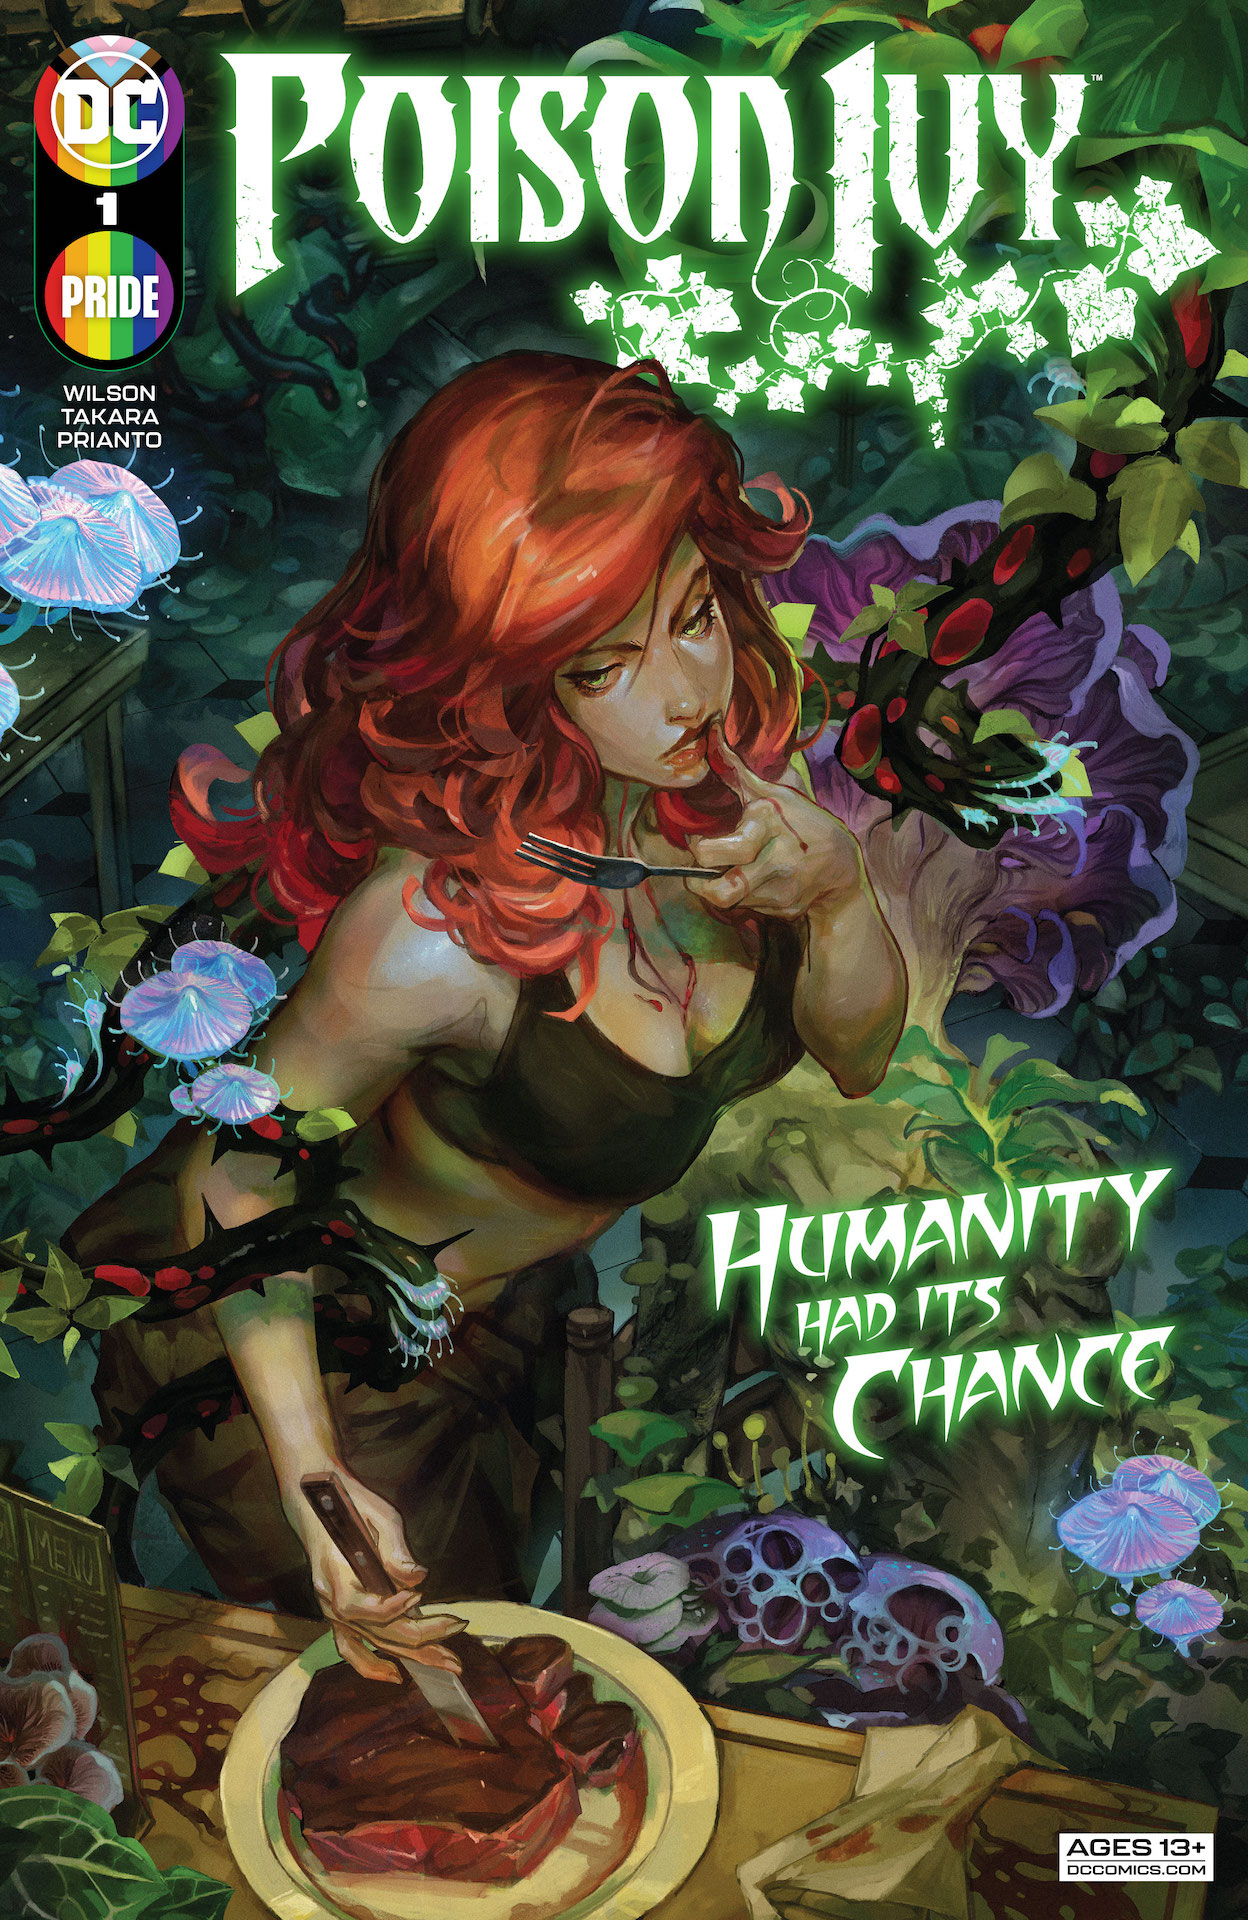 DC Preview: Poison Ivy #1